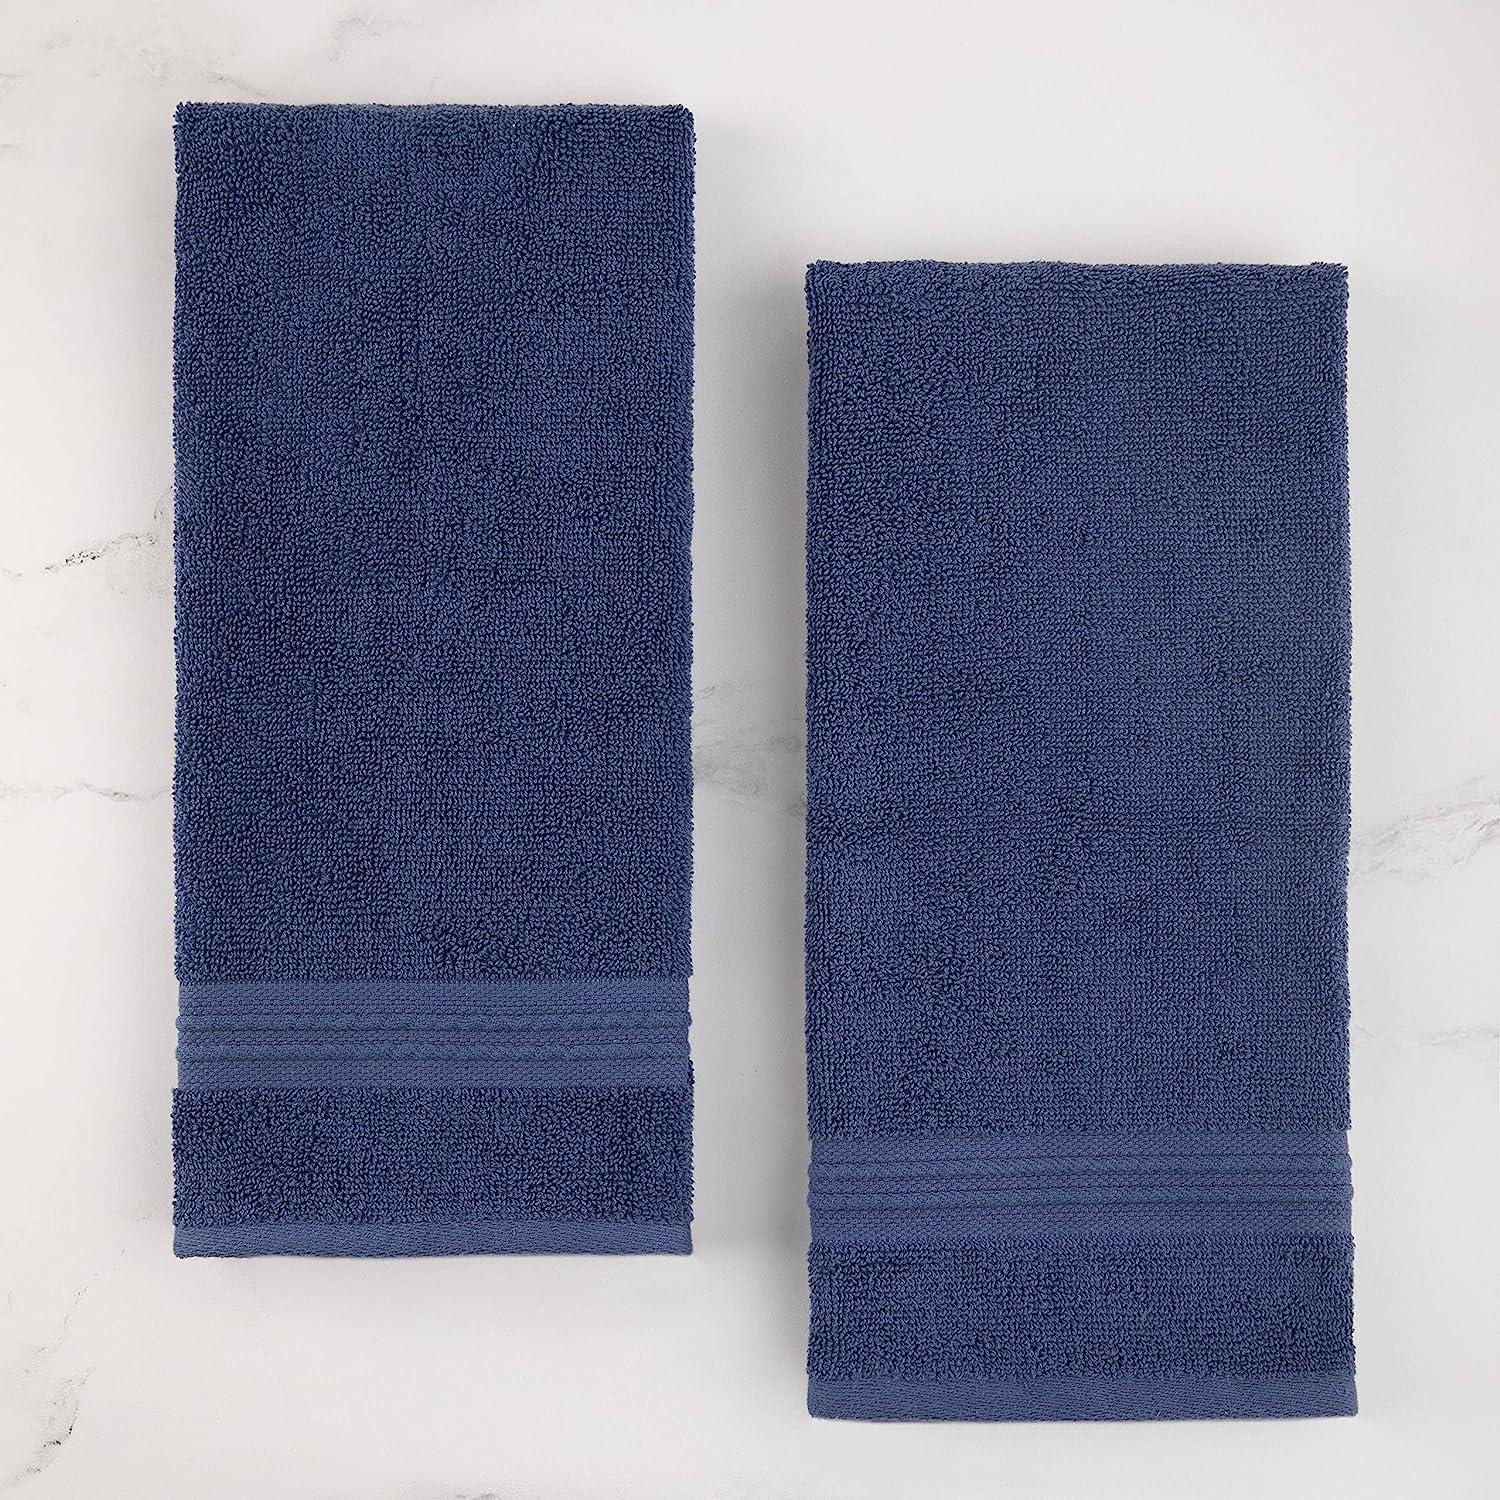 Sticky Toffee Hand Towels for Bathroom Set of 2, 100% Cotton